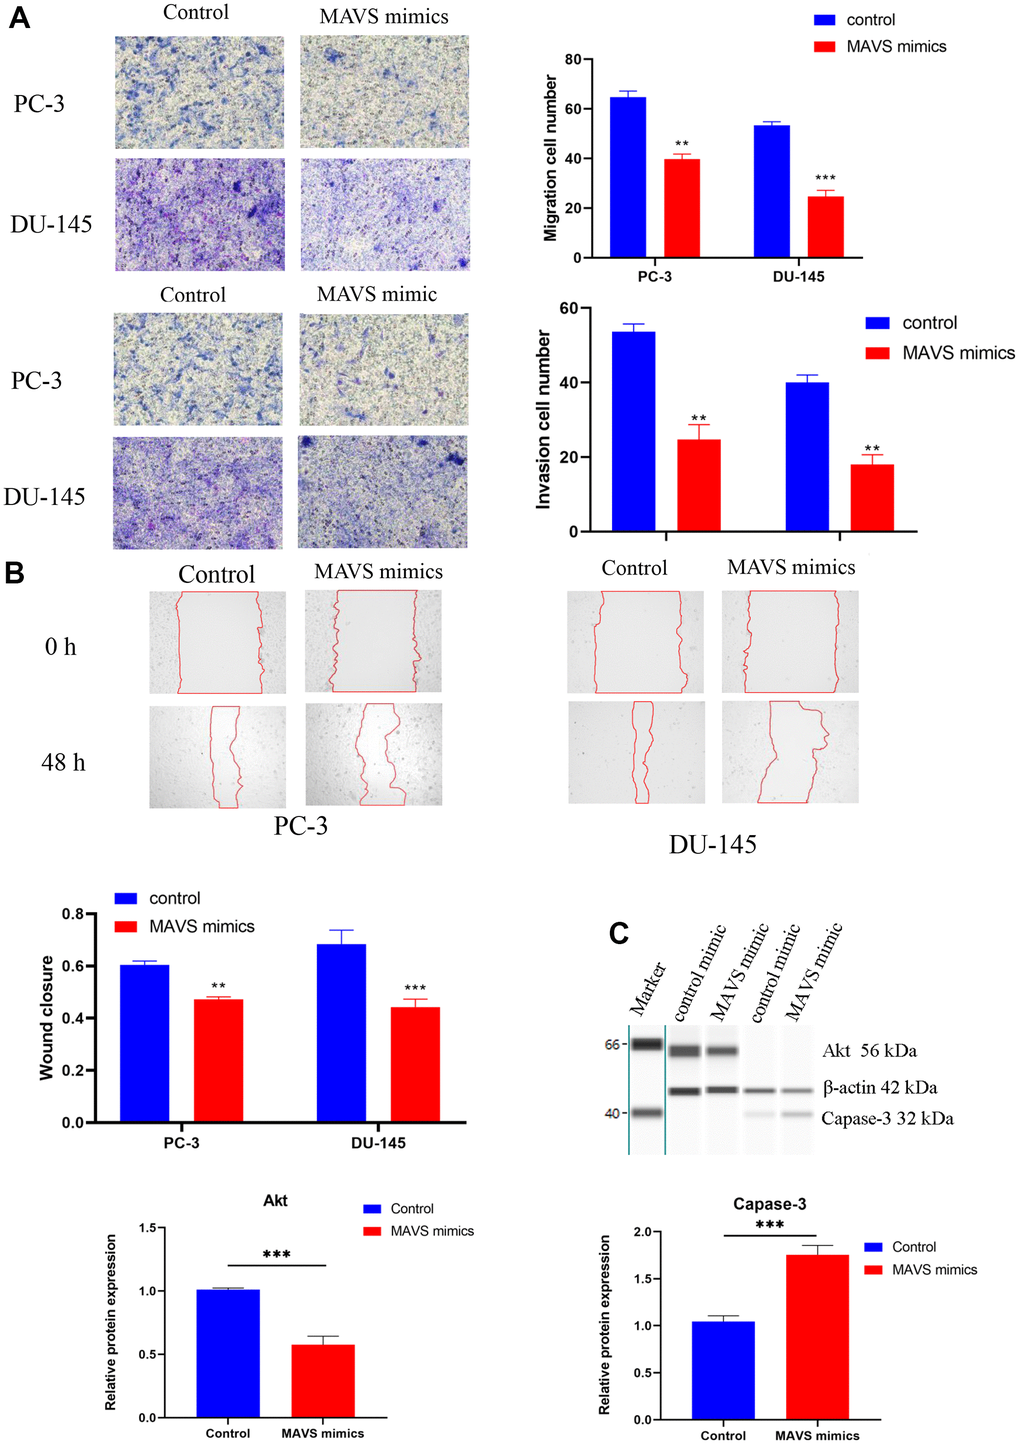 Up-regulation of MAVS suppressed PCa cells’ proliferation and metastasis. (A) Evaluation of migration and invasion abilities in PC-3 and DU-145 cells with MAVS (control and mimics) via Transwell assay. (B) Confirmation of the inhibitory effect of MAVS mimics on PC-3 and DU-145 cells via wound healing assay. (C) Capillary immunoblotting analysis of Akt and Capase-3 in PC-3 cells with MAVS (controls and mimics). The original full blots are provided in Supplementary Figure 5. *P 